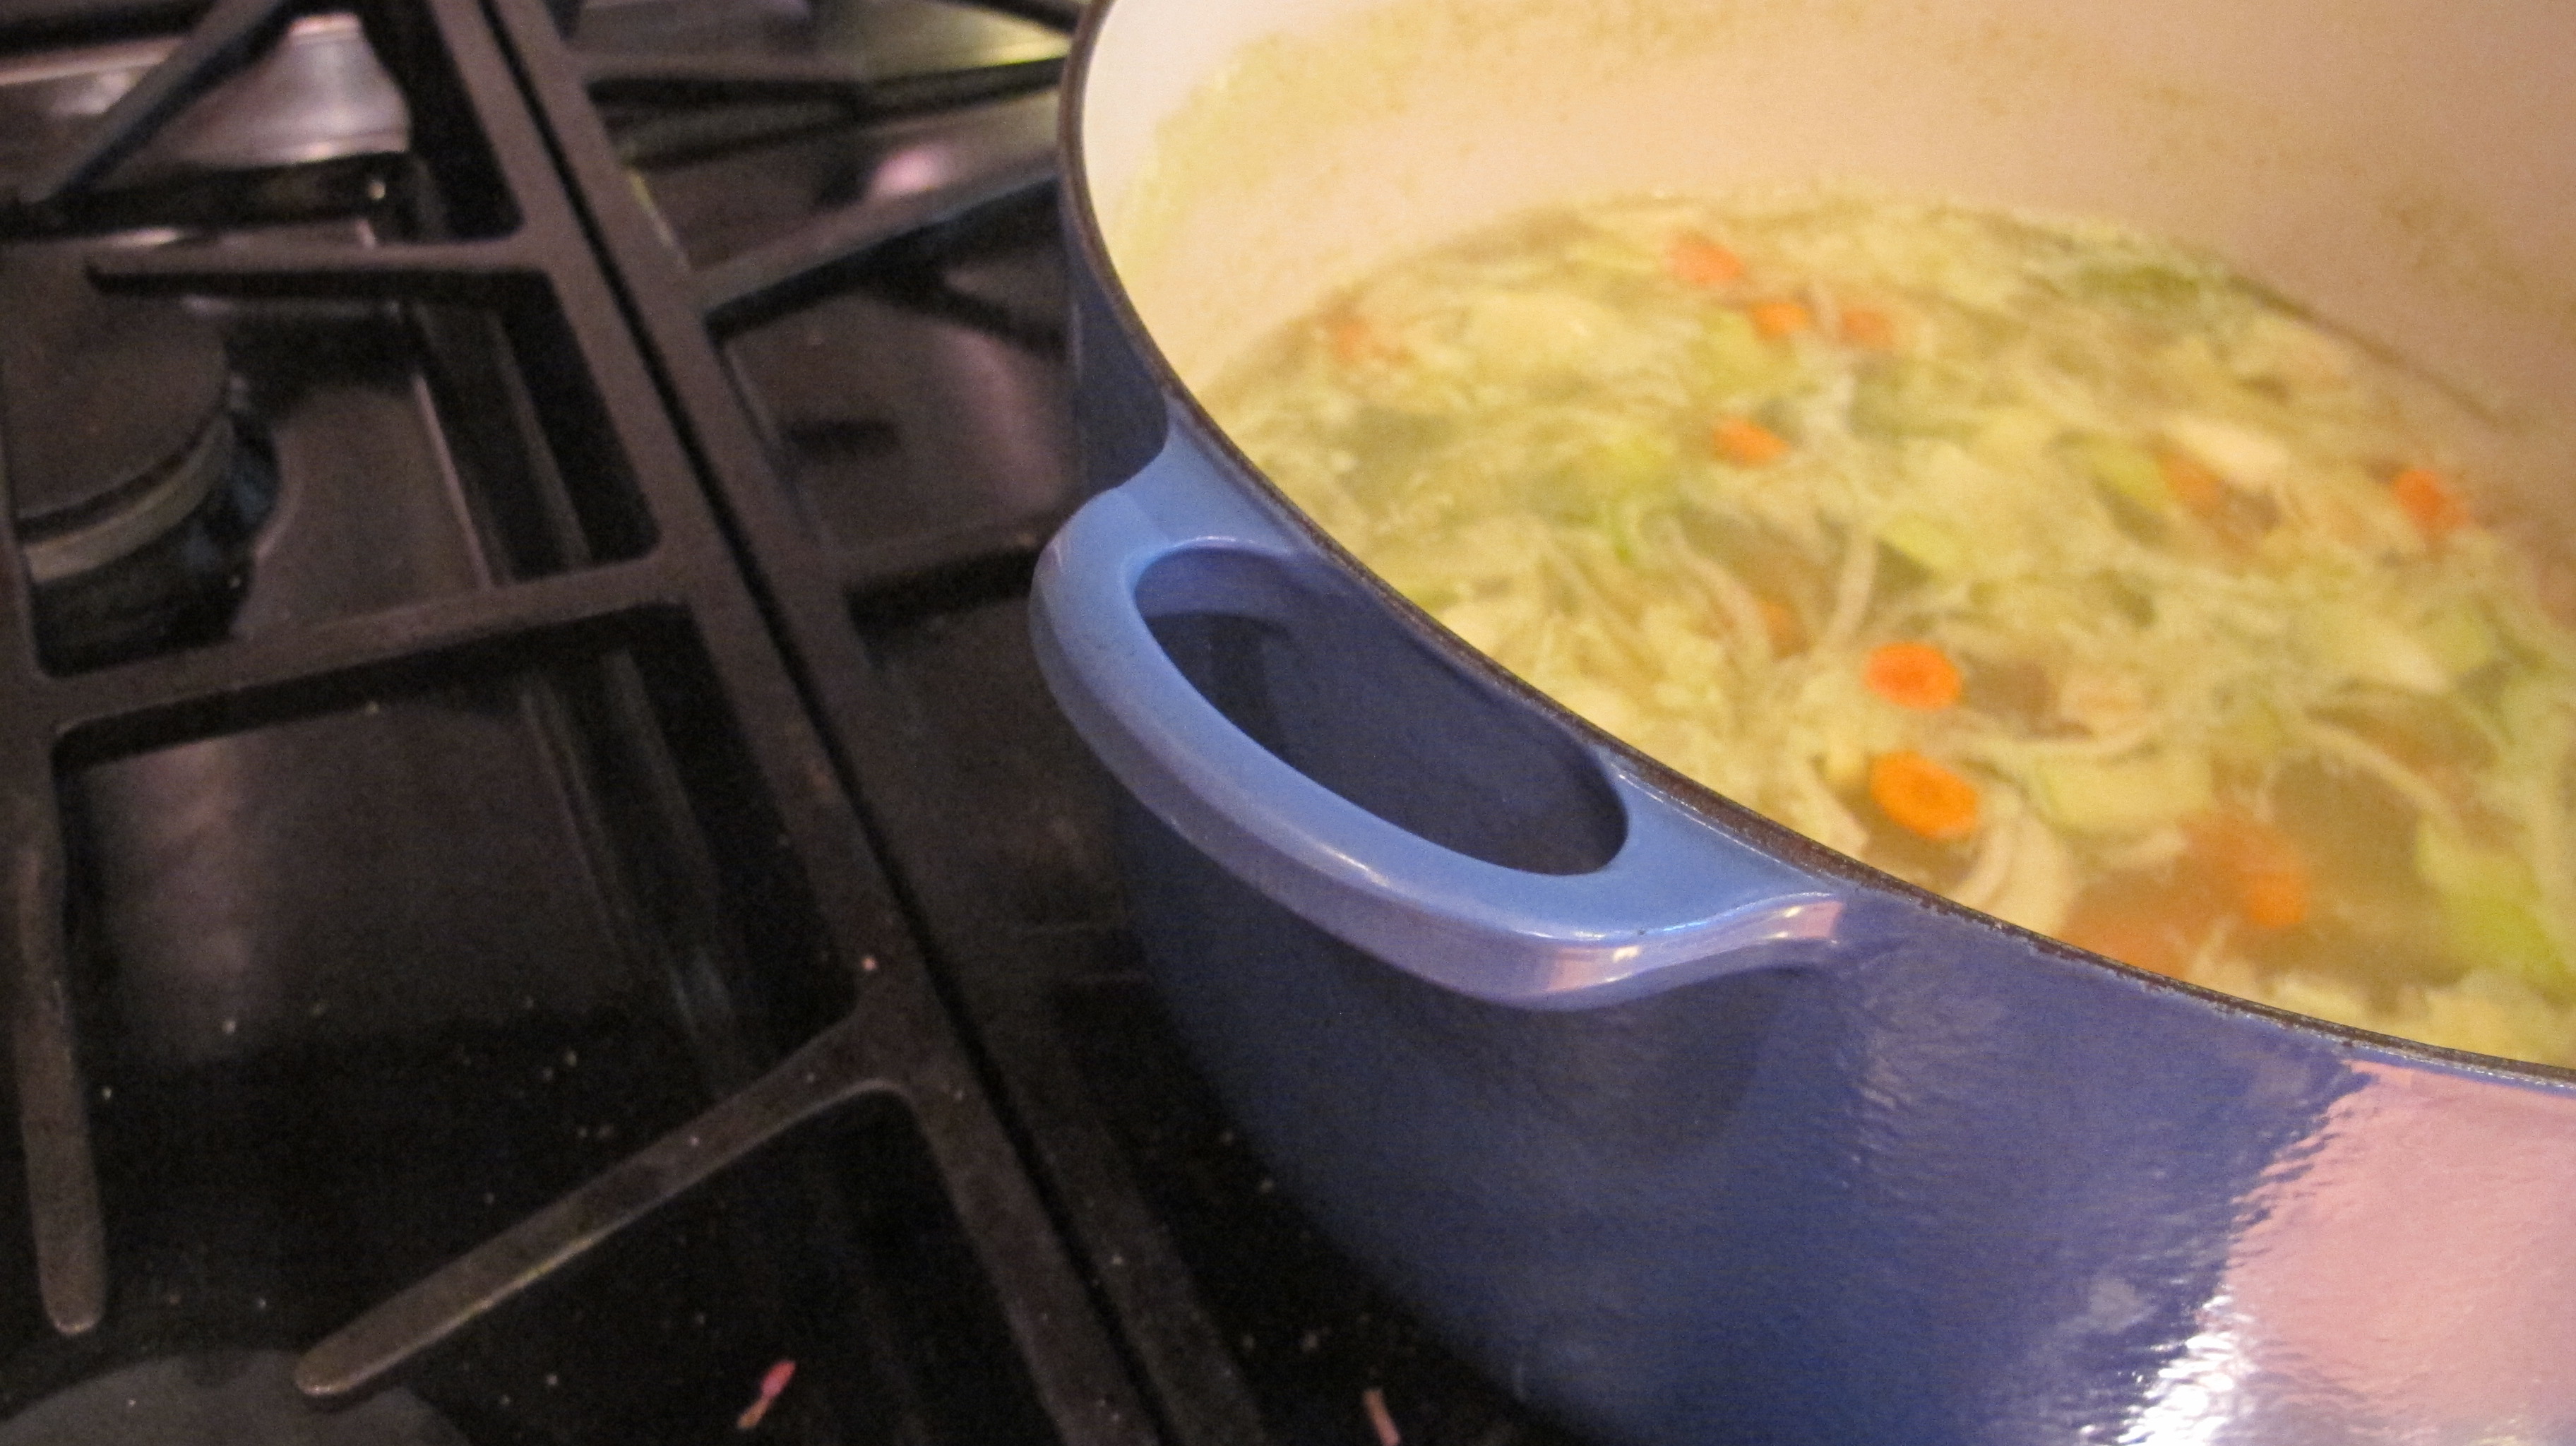 Soup Cooking